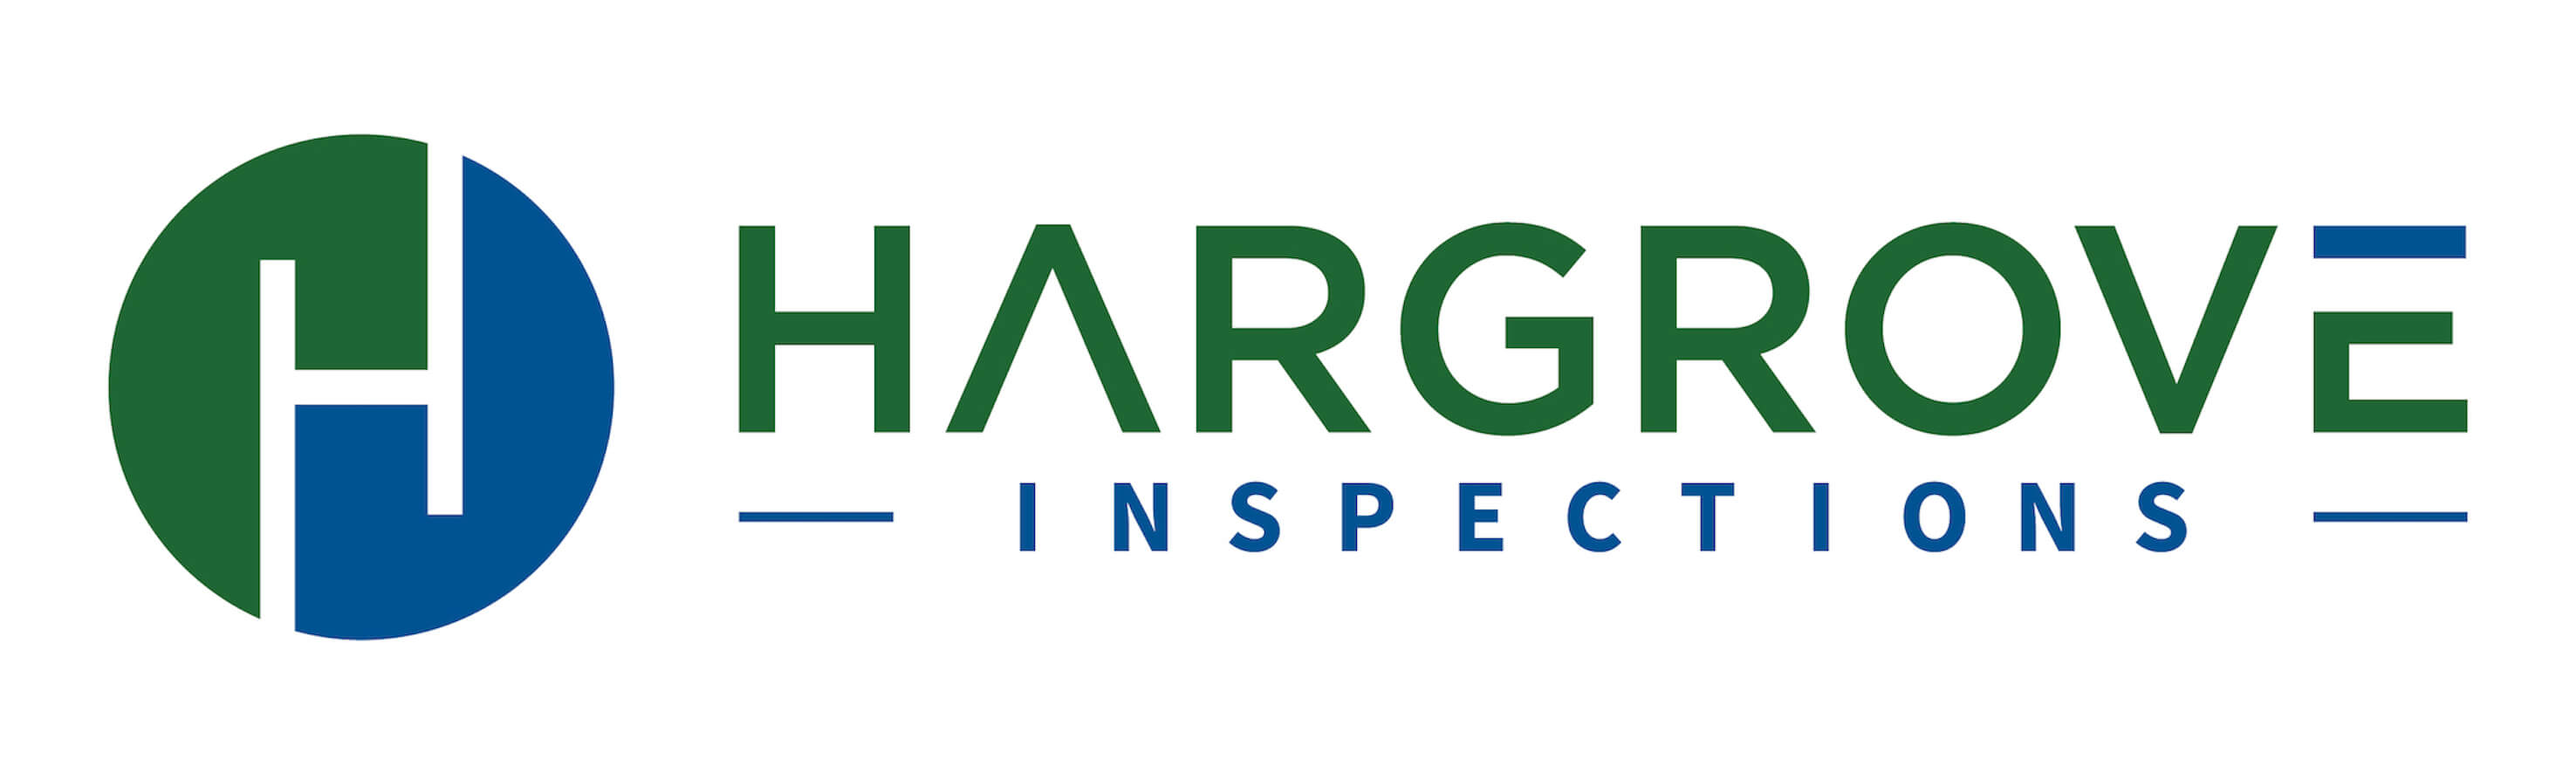 Hargrove Inspections